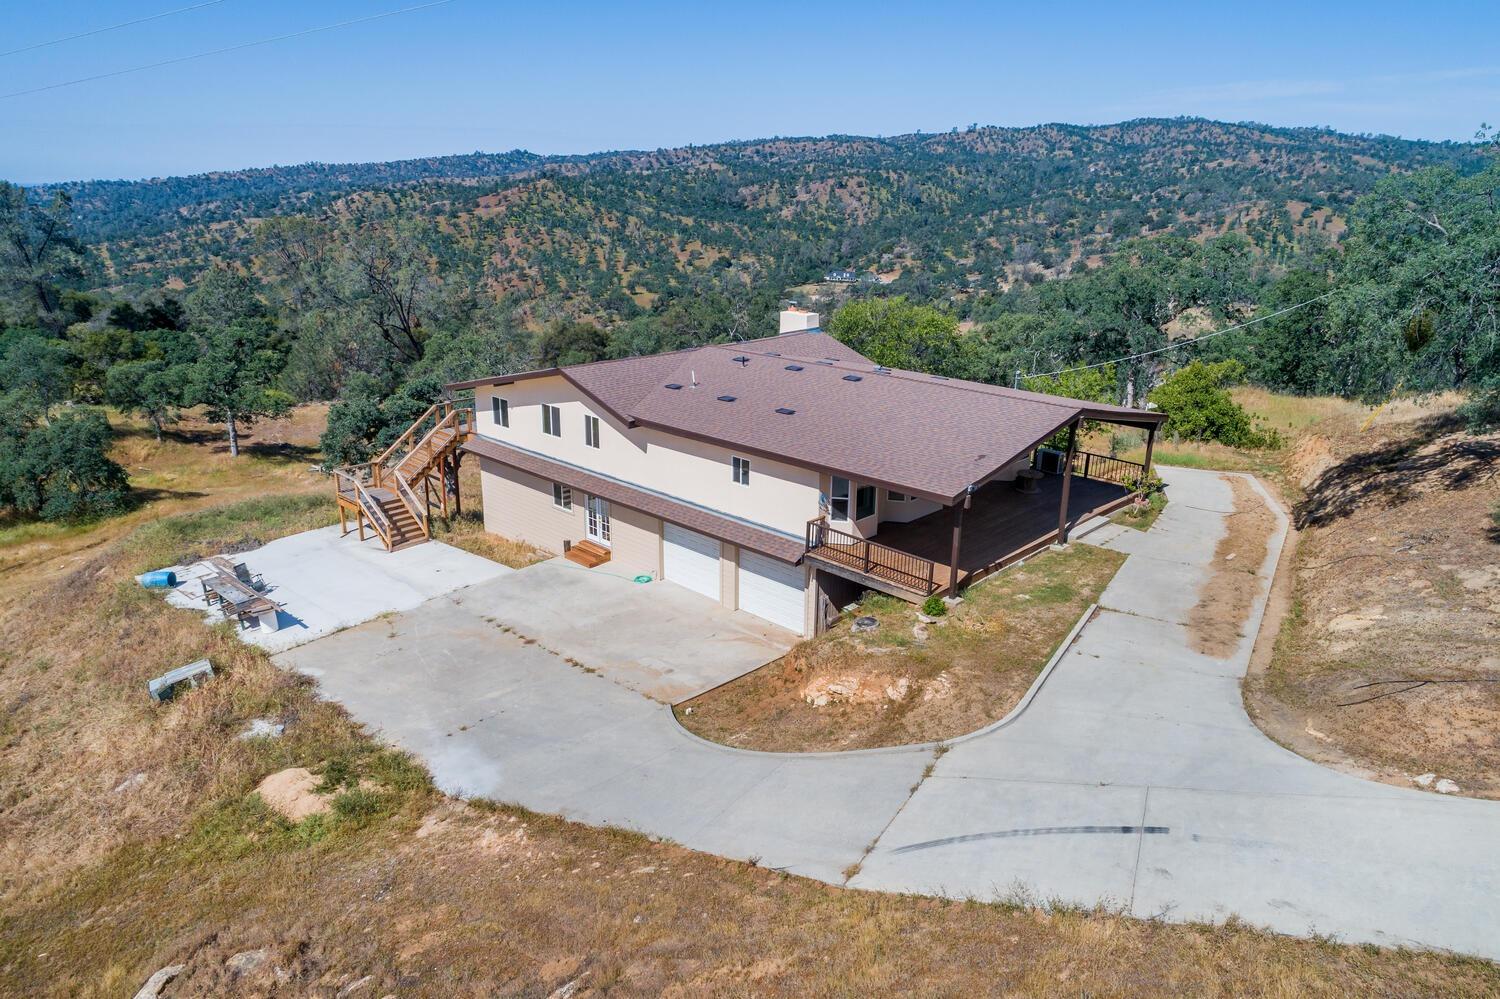 Photo of 31536 Big River Wy in Coarsegold, CA